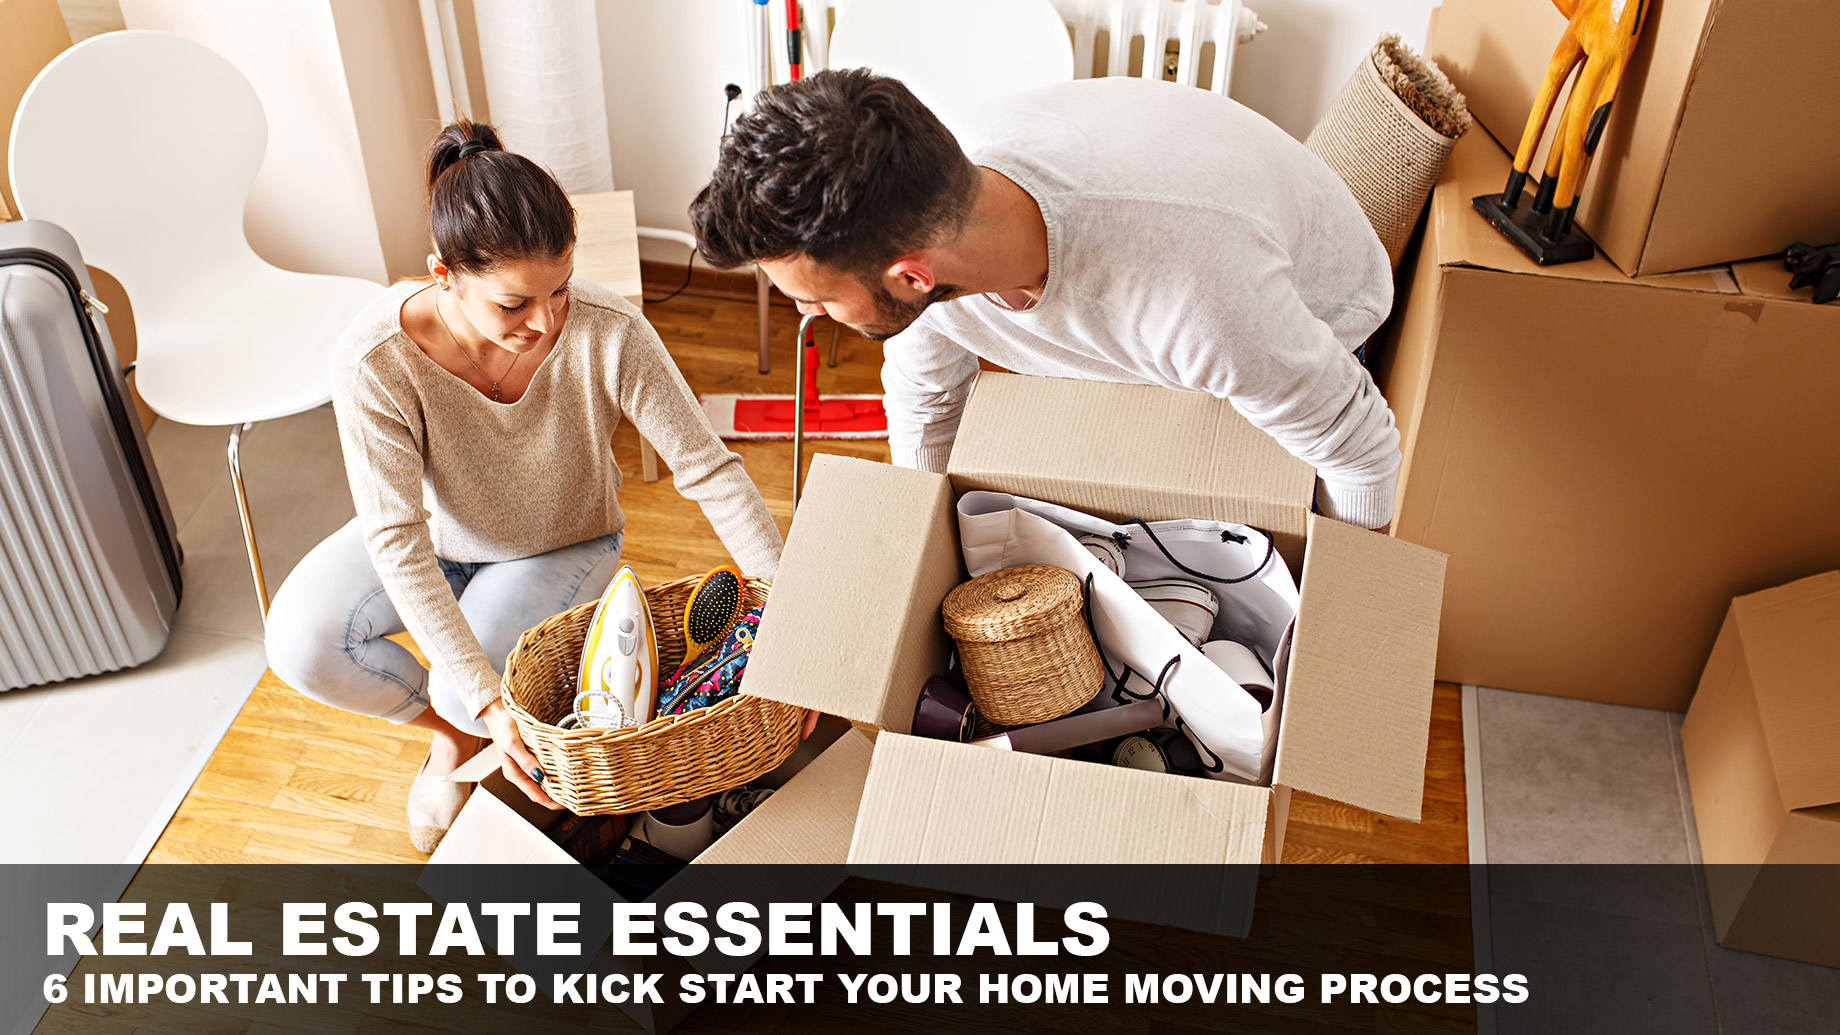 Real Estate Essentials - 6 Important Tips to Kick Start Your Home Moving Process